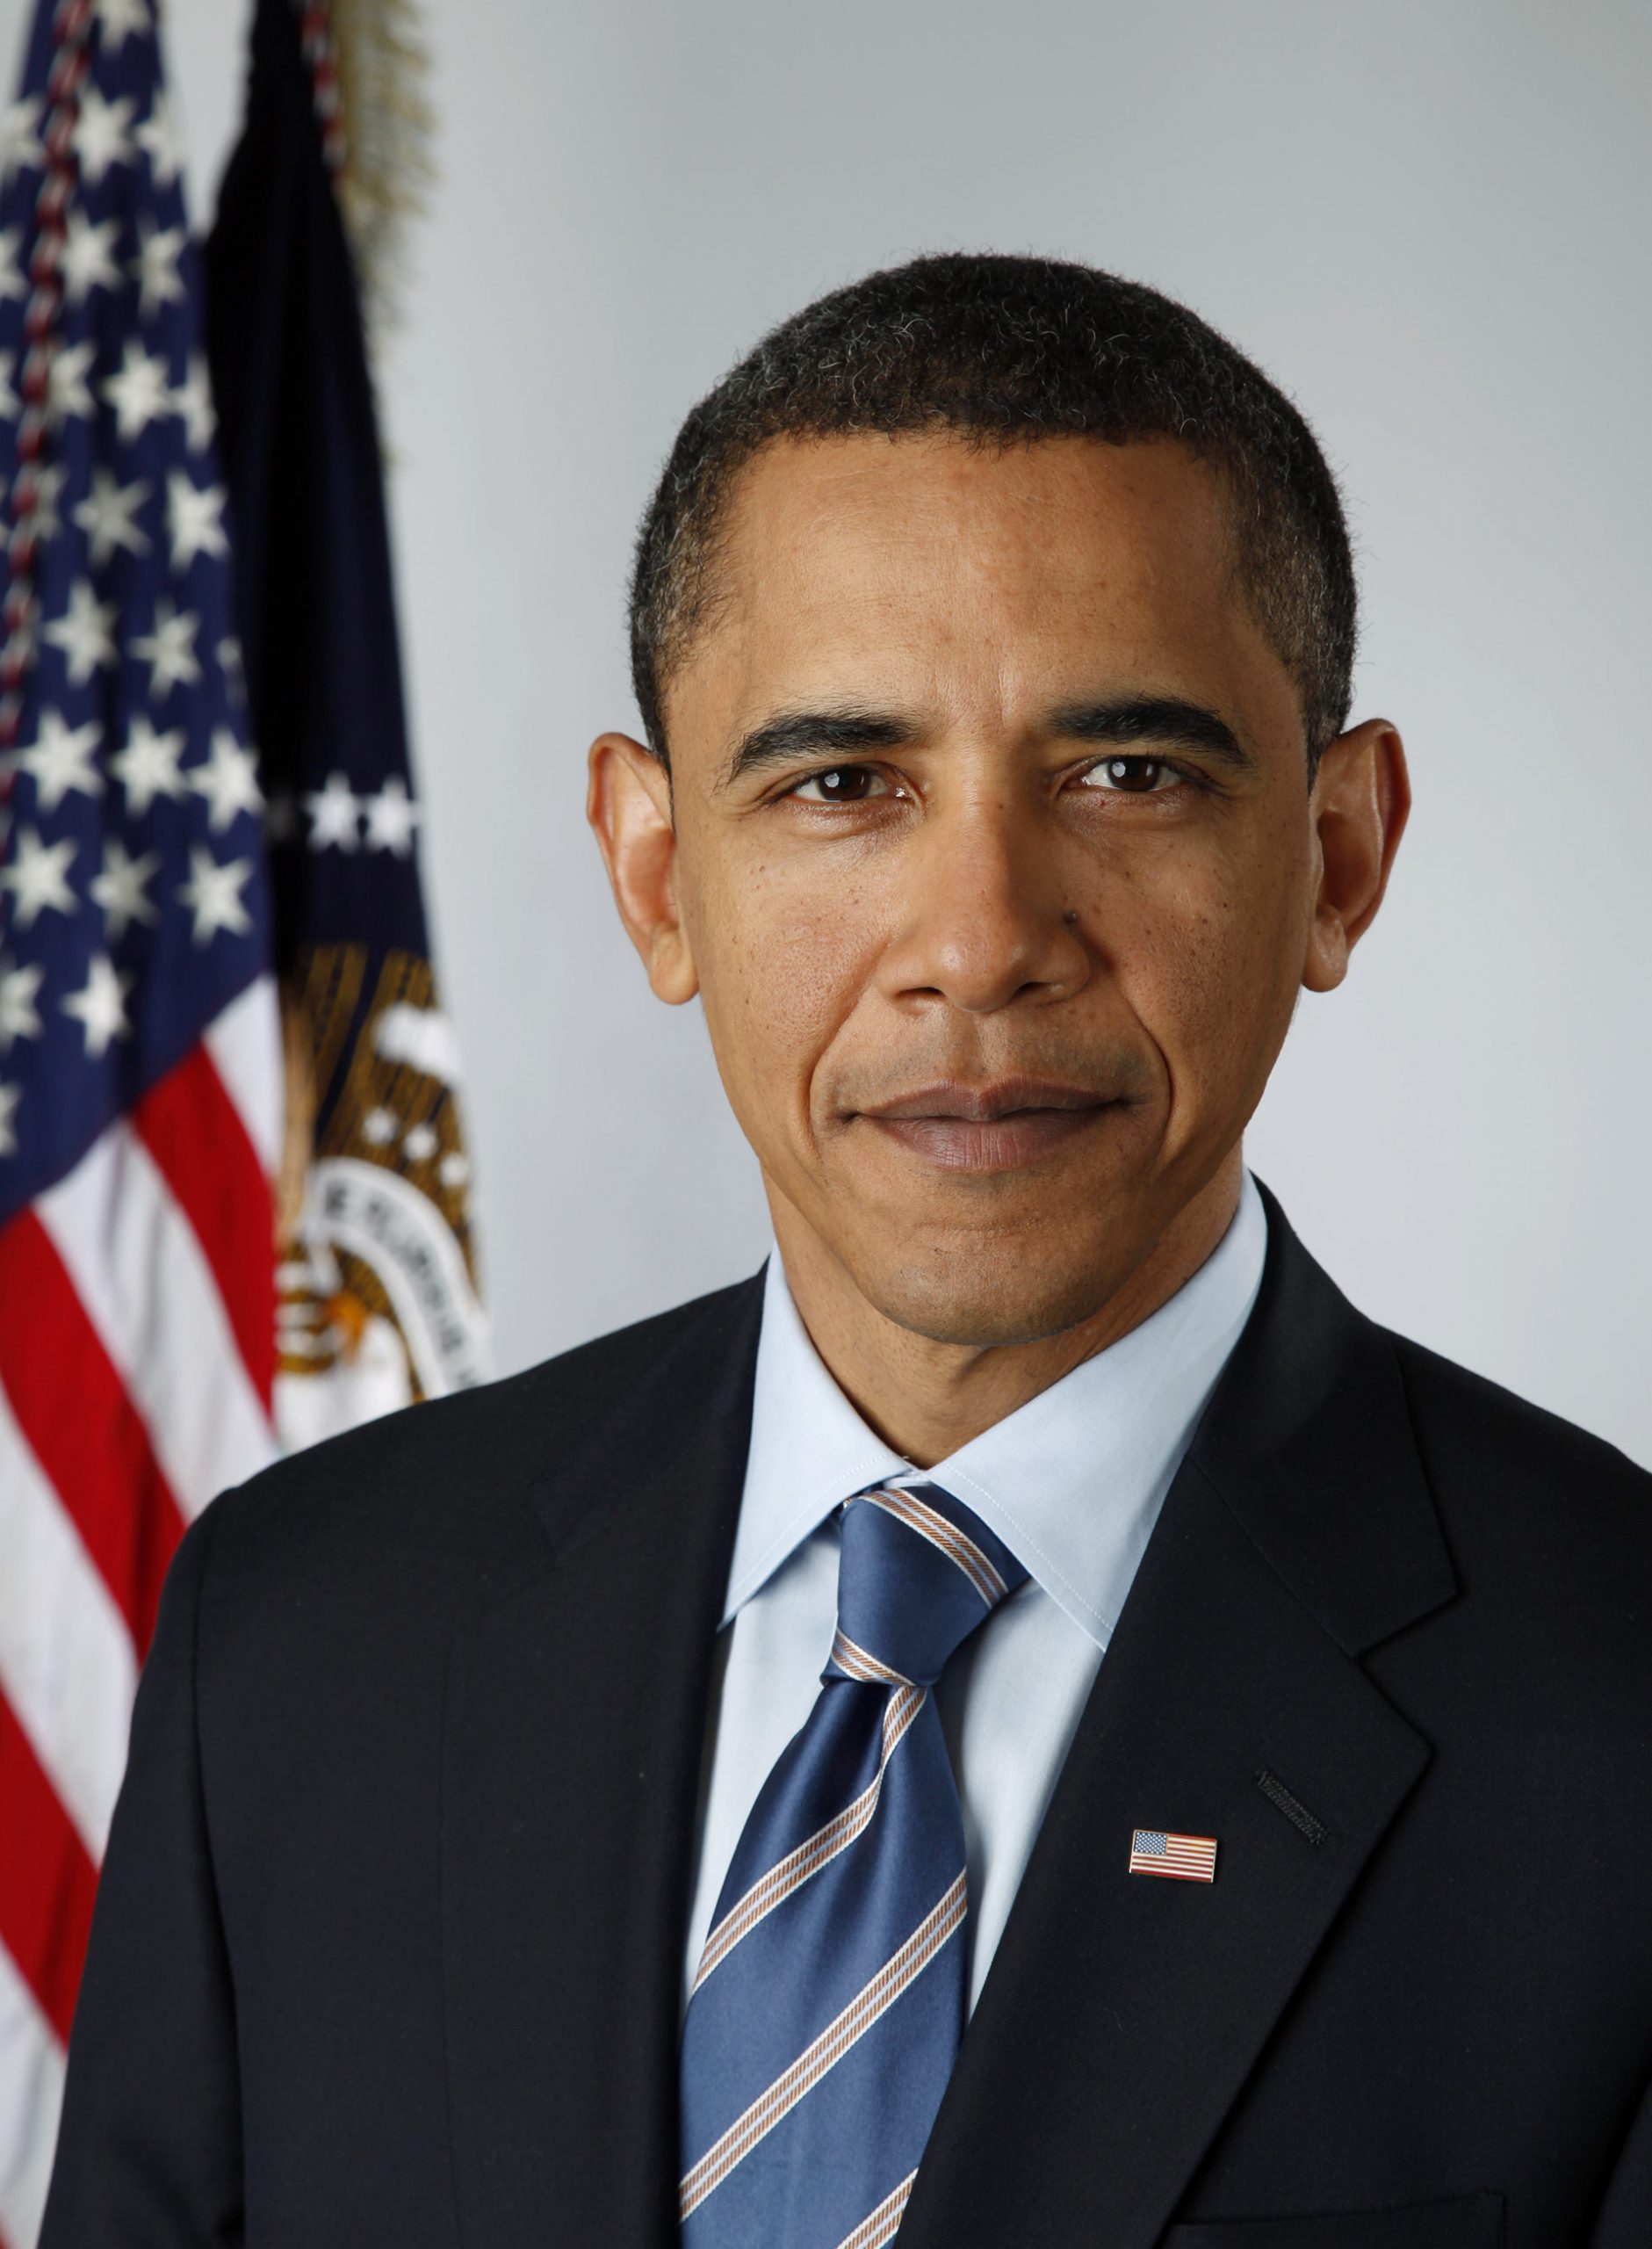 Official photographic portrait of US President Barack Obama (born 4 August 1961; assumed office 20 January 2009)